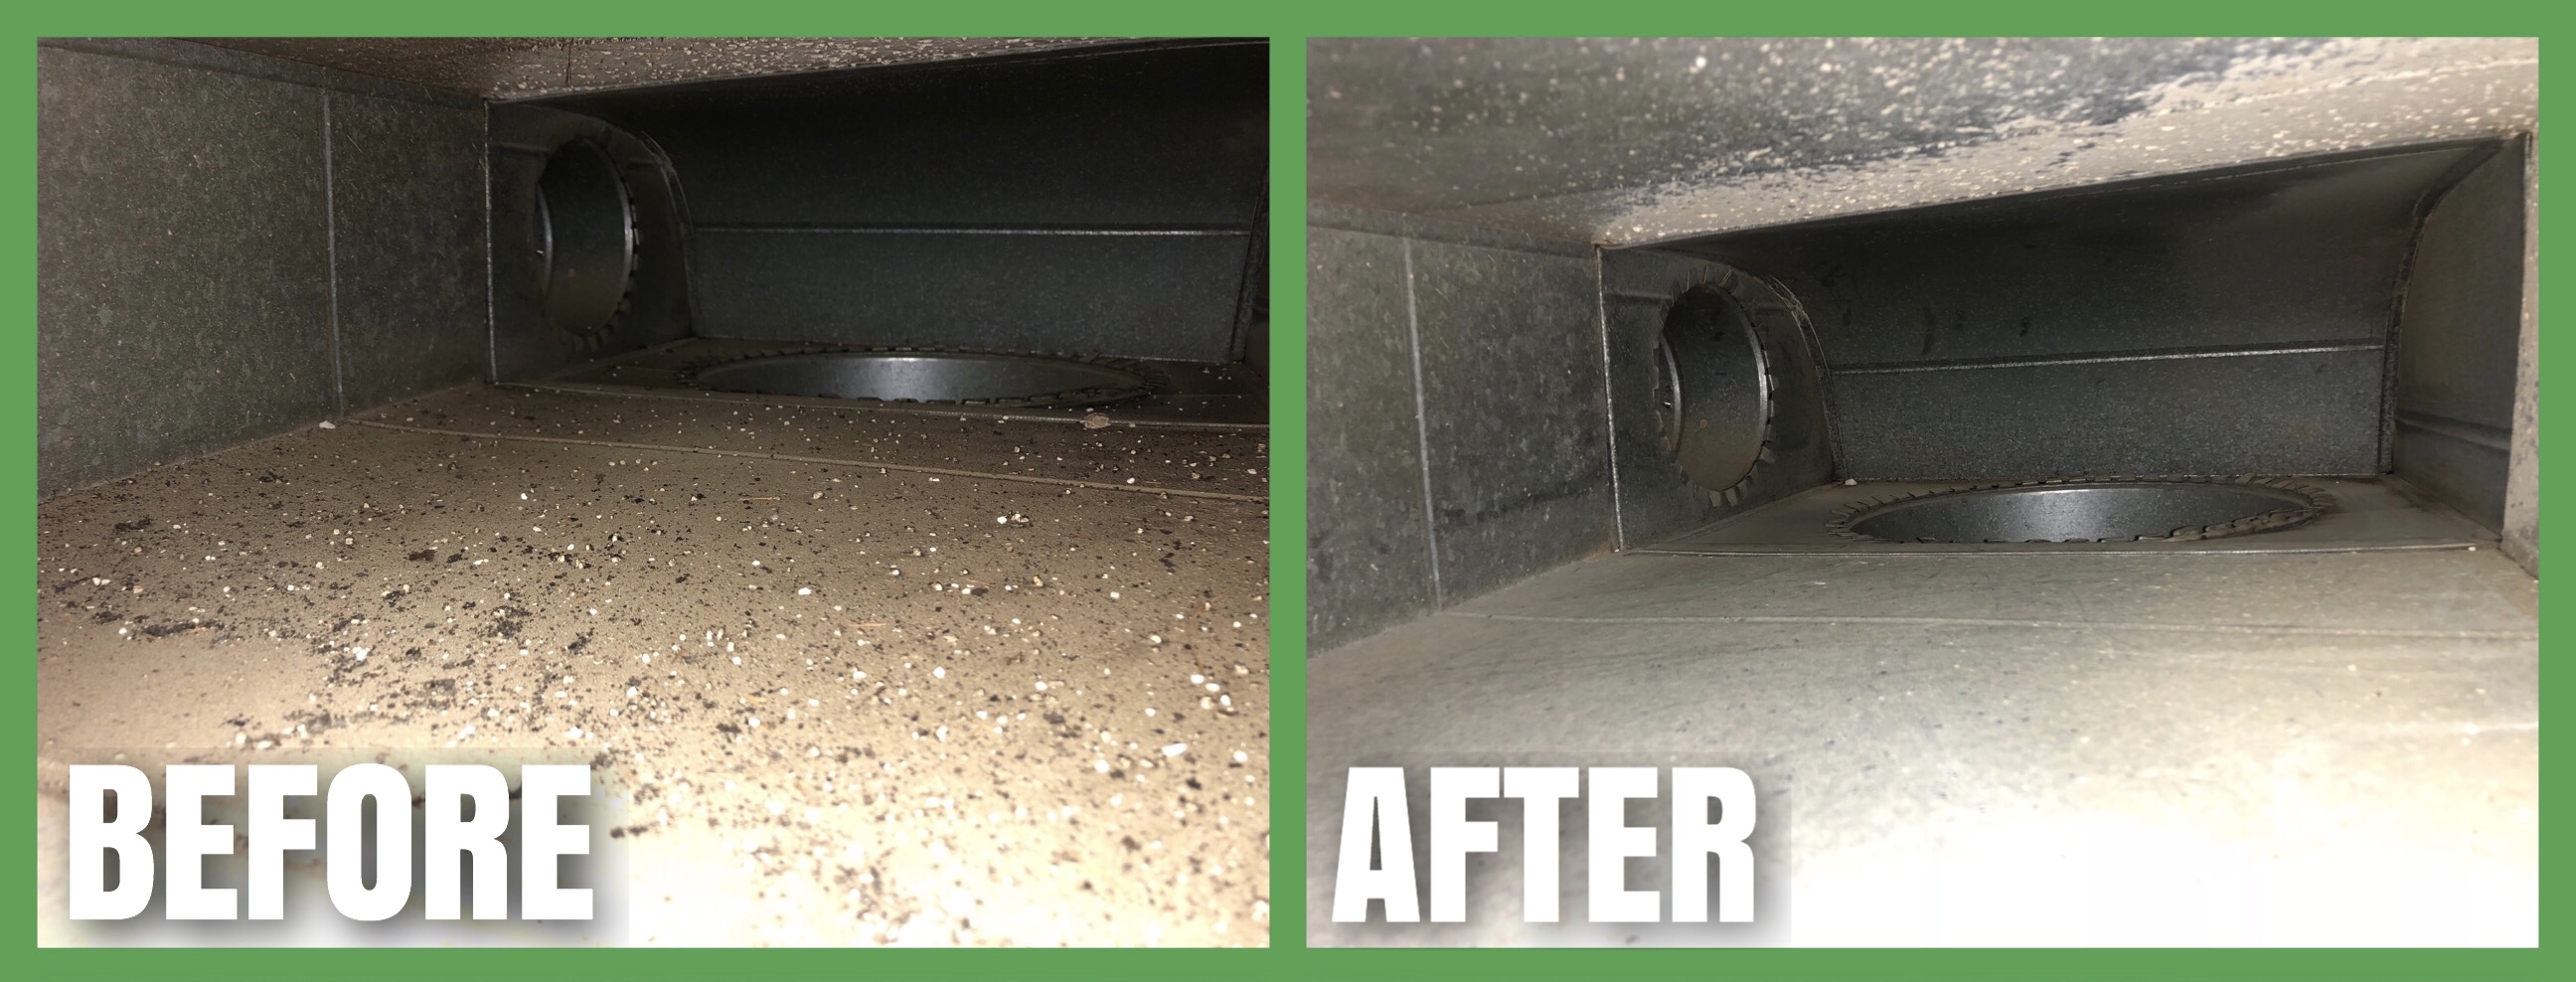 Greensboro Air Duct Cleaning  Hernandez Carpet Cleaning